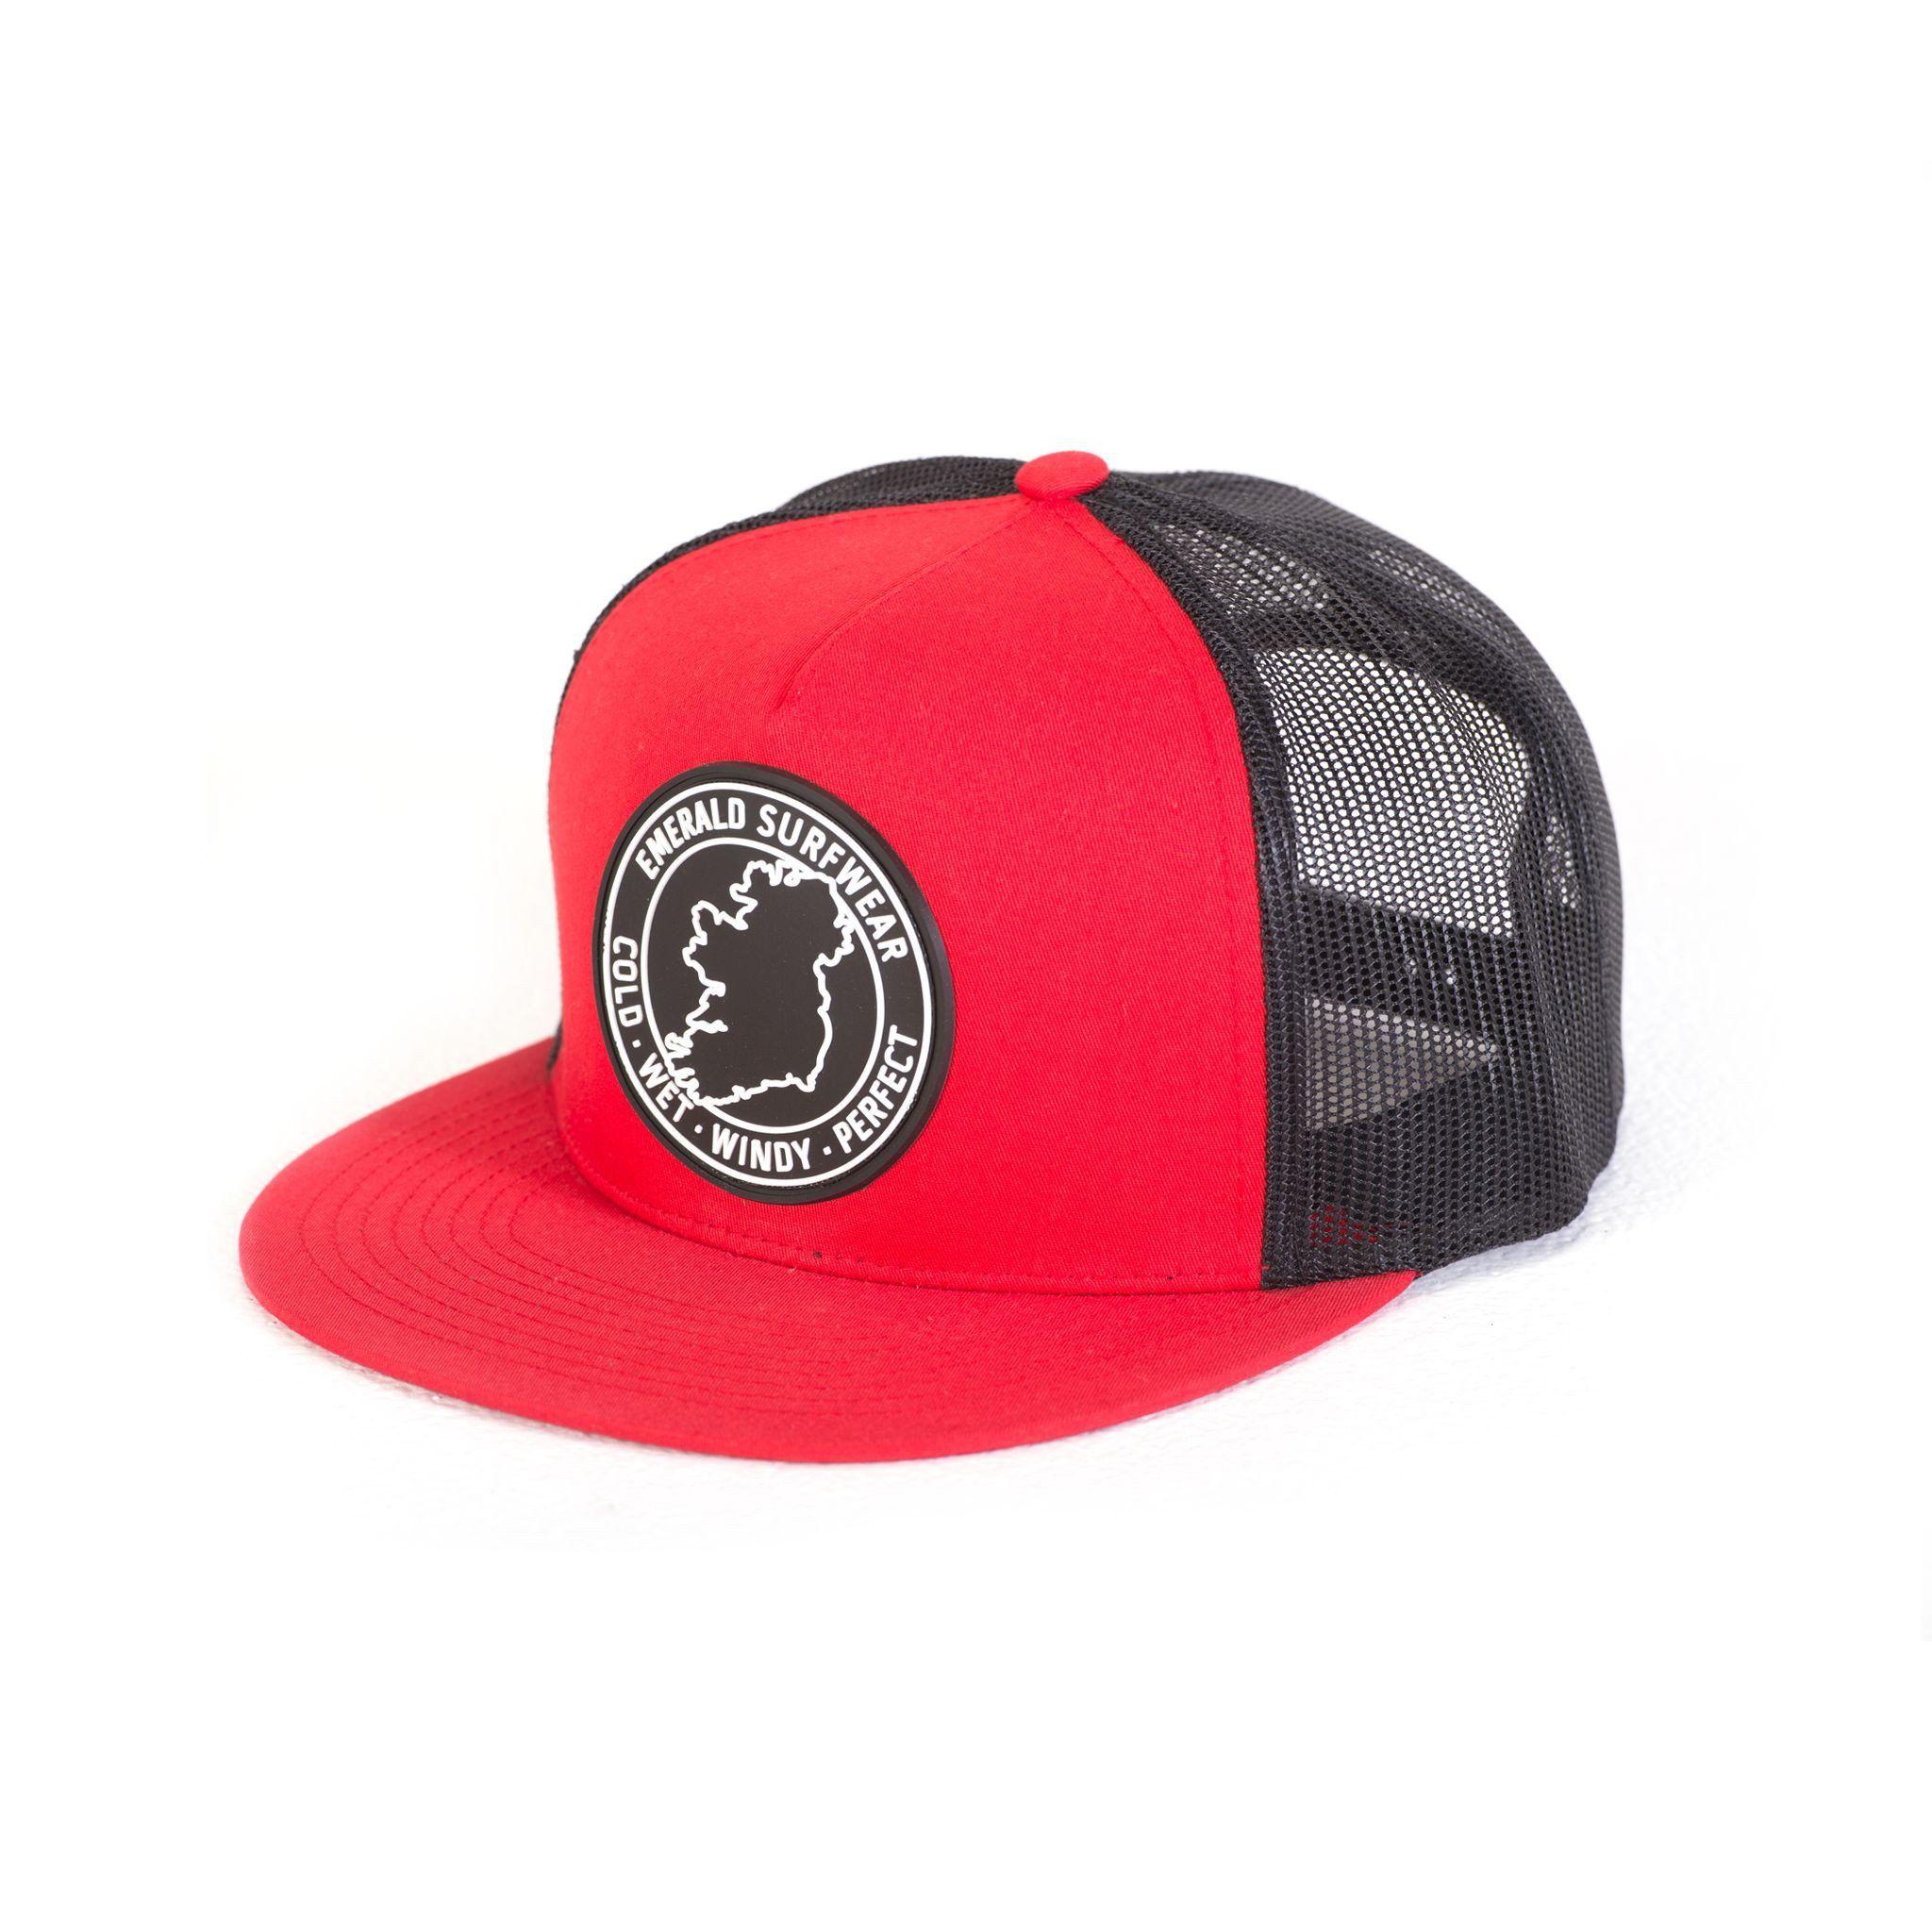 Red Emerald Logo - Emerald Surfwear Trucker Cap (Red & Black) – Groundswell Supply